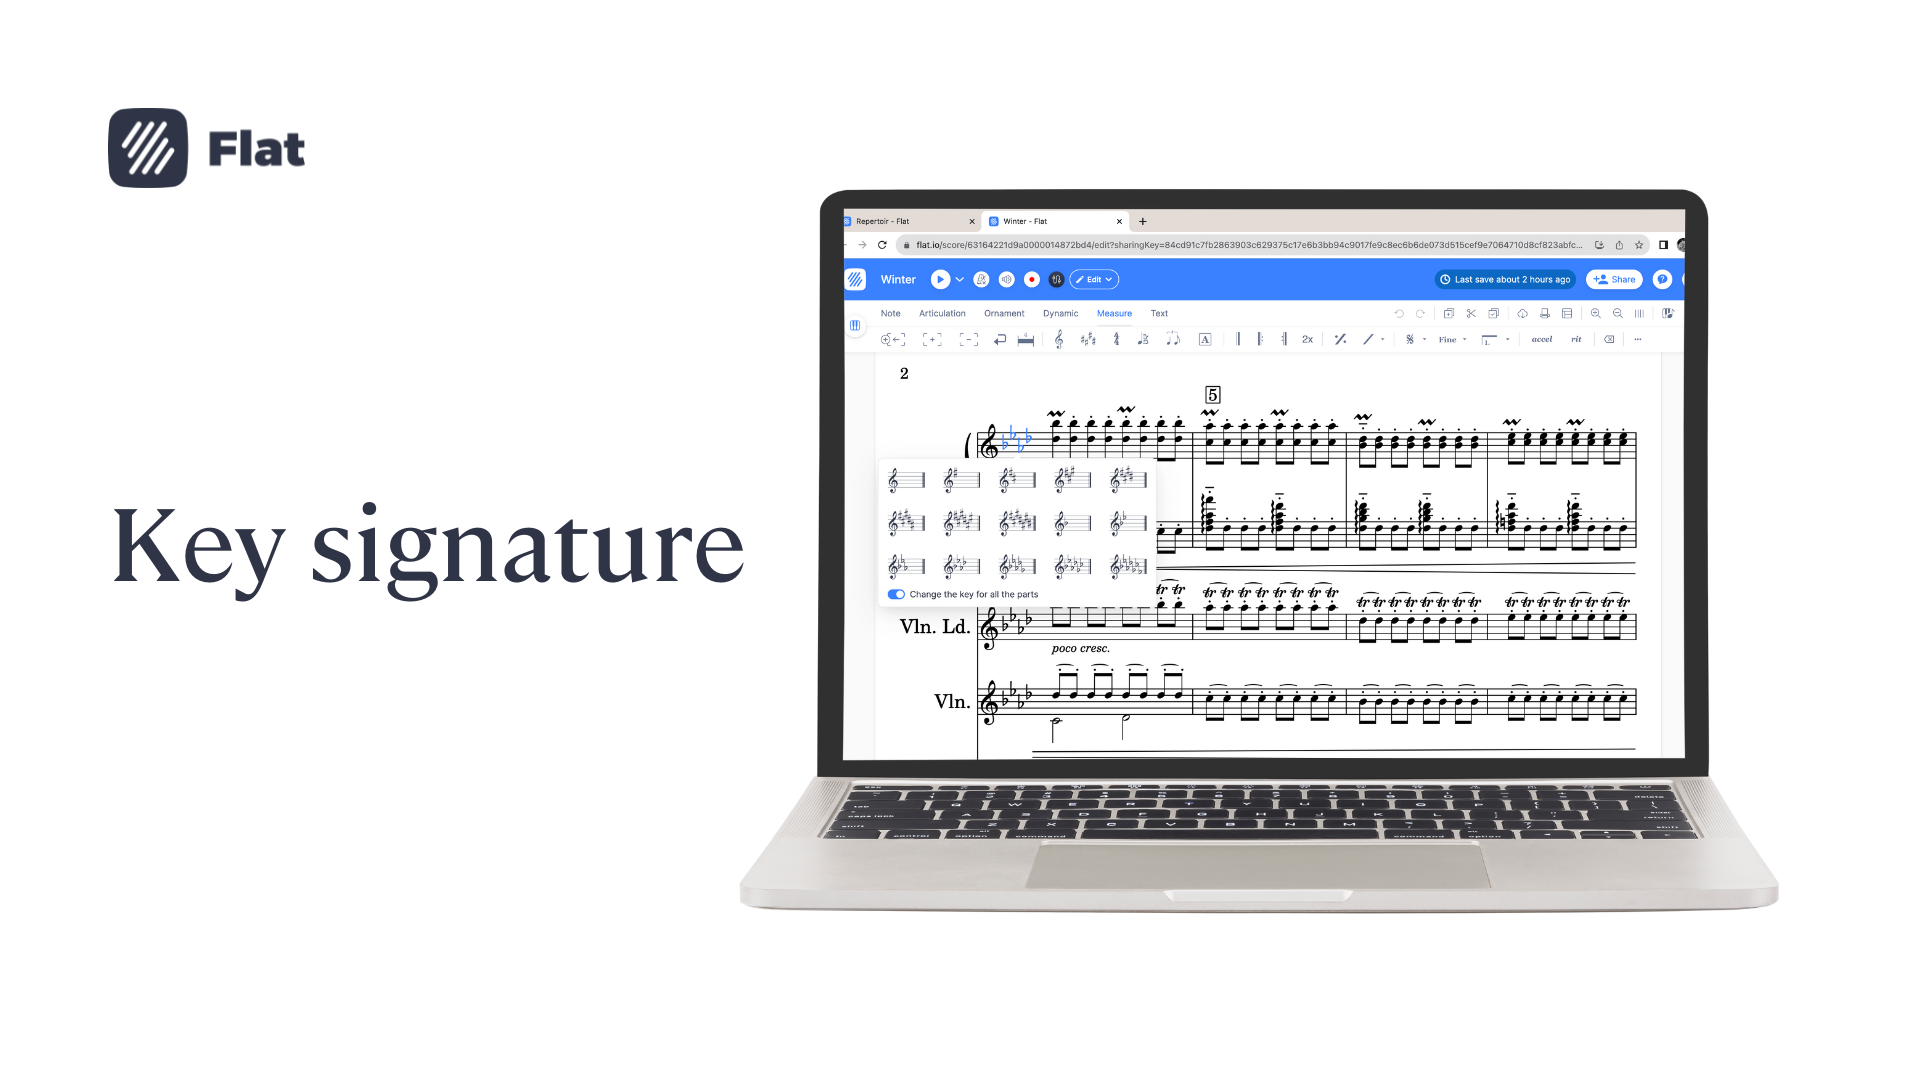 How to use the key signature